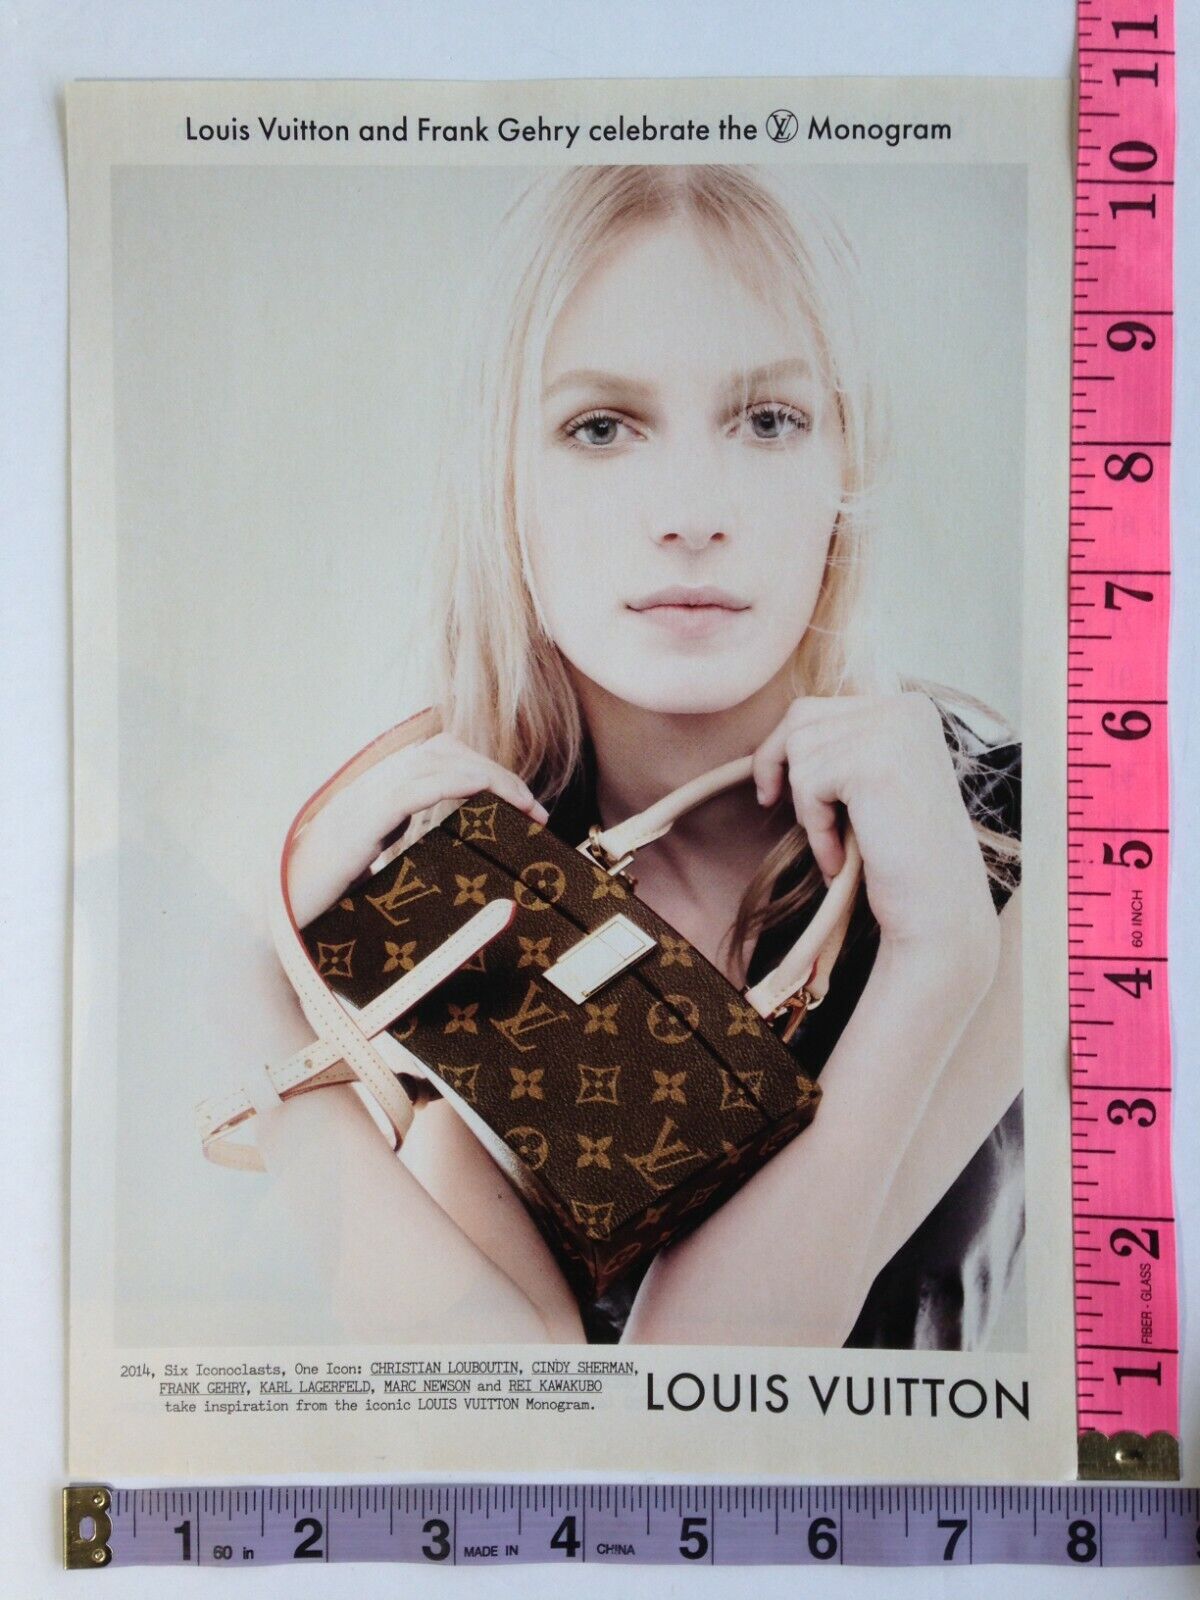 Print Ad - Louis Vuitton Frank Gehry designed bag photo, fashion, model